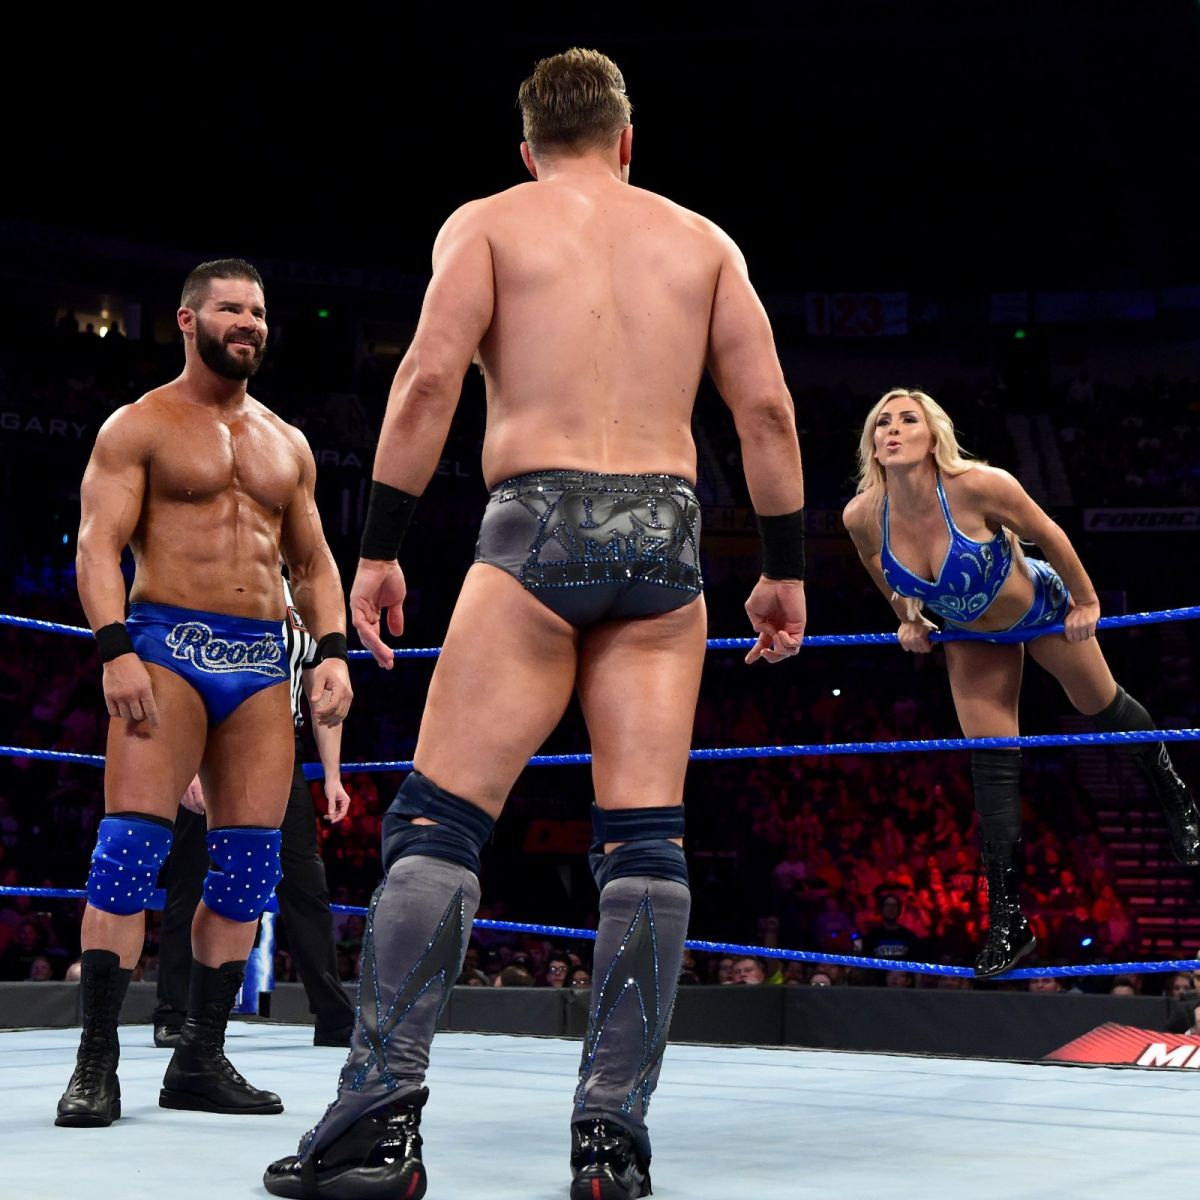 Mixed matches undrwtr. Charlotte Bobby Roode.